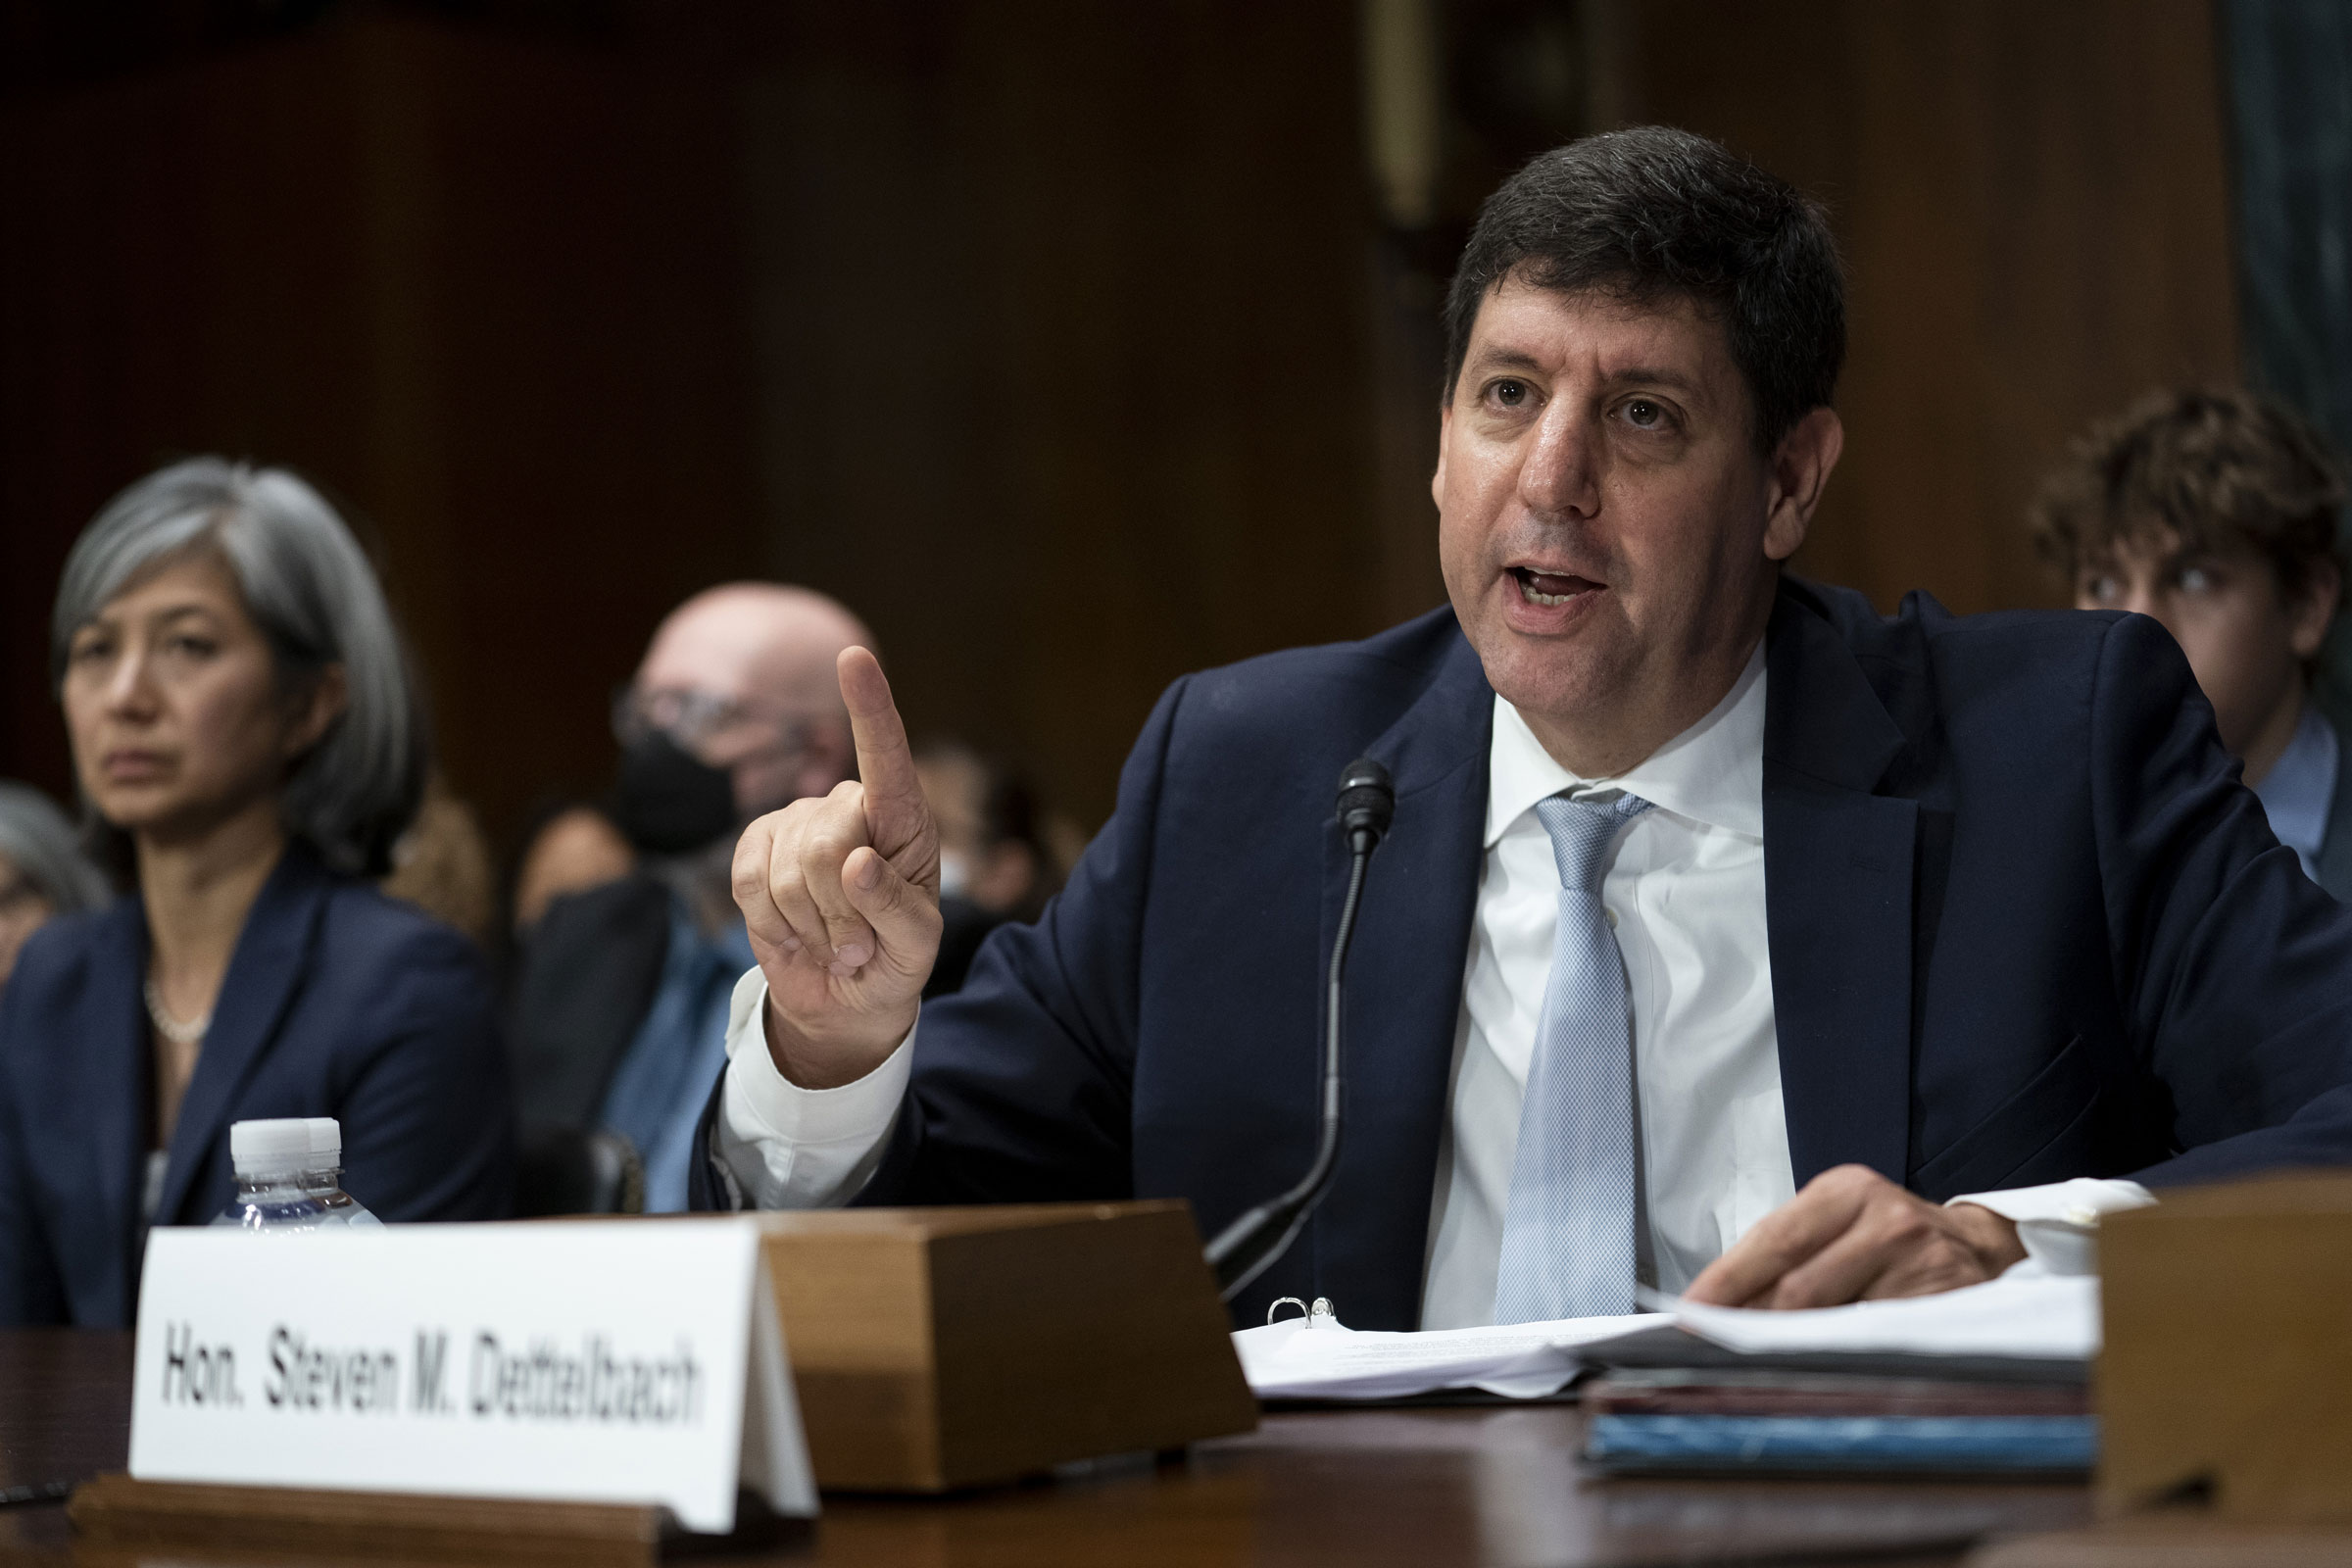 Steven Dettelbach, director of the Bureau of Alcohol, Tobacco, Firearms and Explosives (ATF) nominee for US President Joe Biden, speaks during a Senate Judiciary Committee confirmation hearing in Washington, D.C., US, on Wednesday, May 25, 2022. (Sarah Silbiger—Bloomberg/Getty Images)